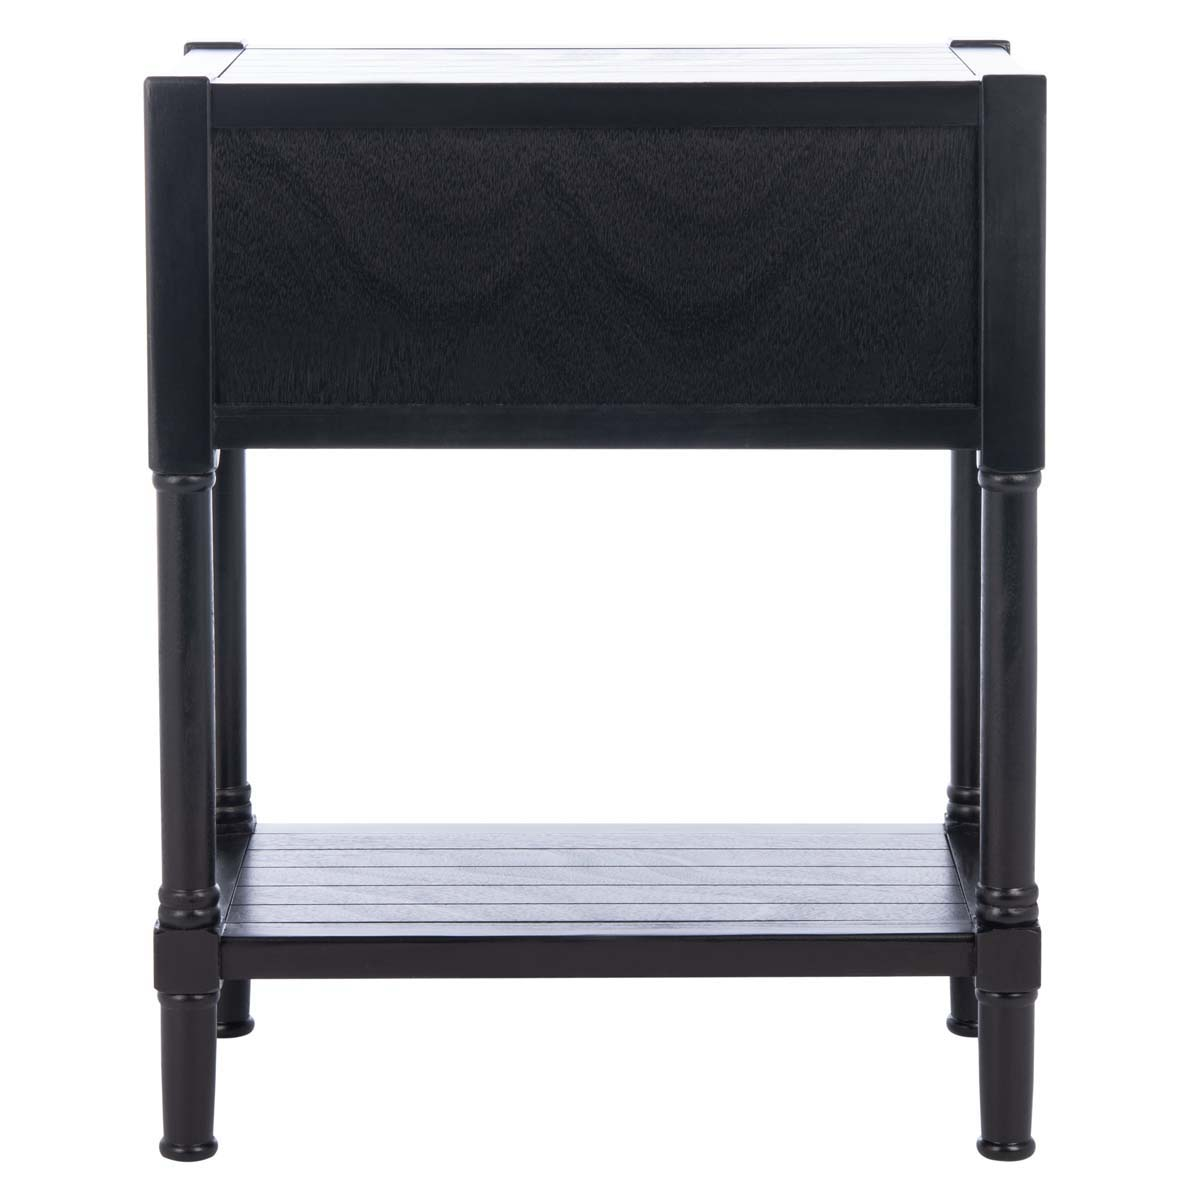 Safavieh Filbert 3 Drawer Console Table , CNS5717